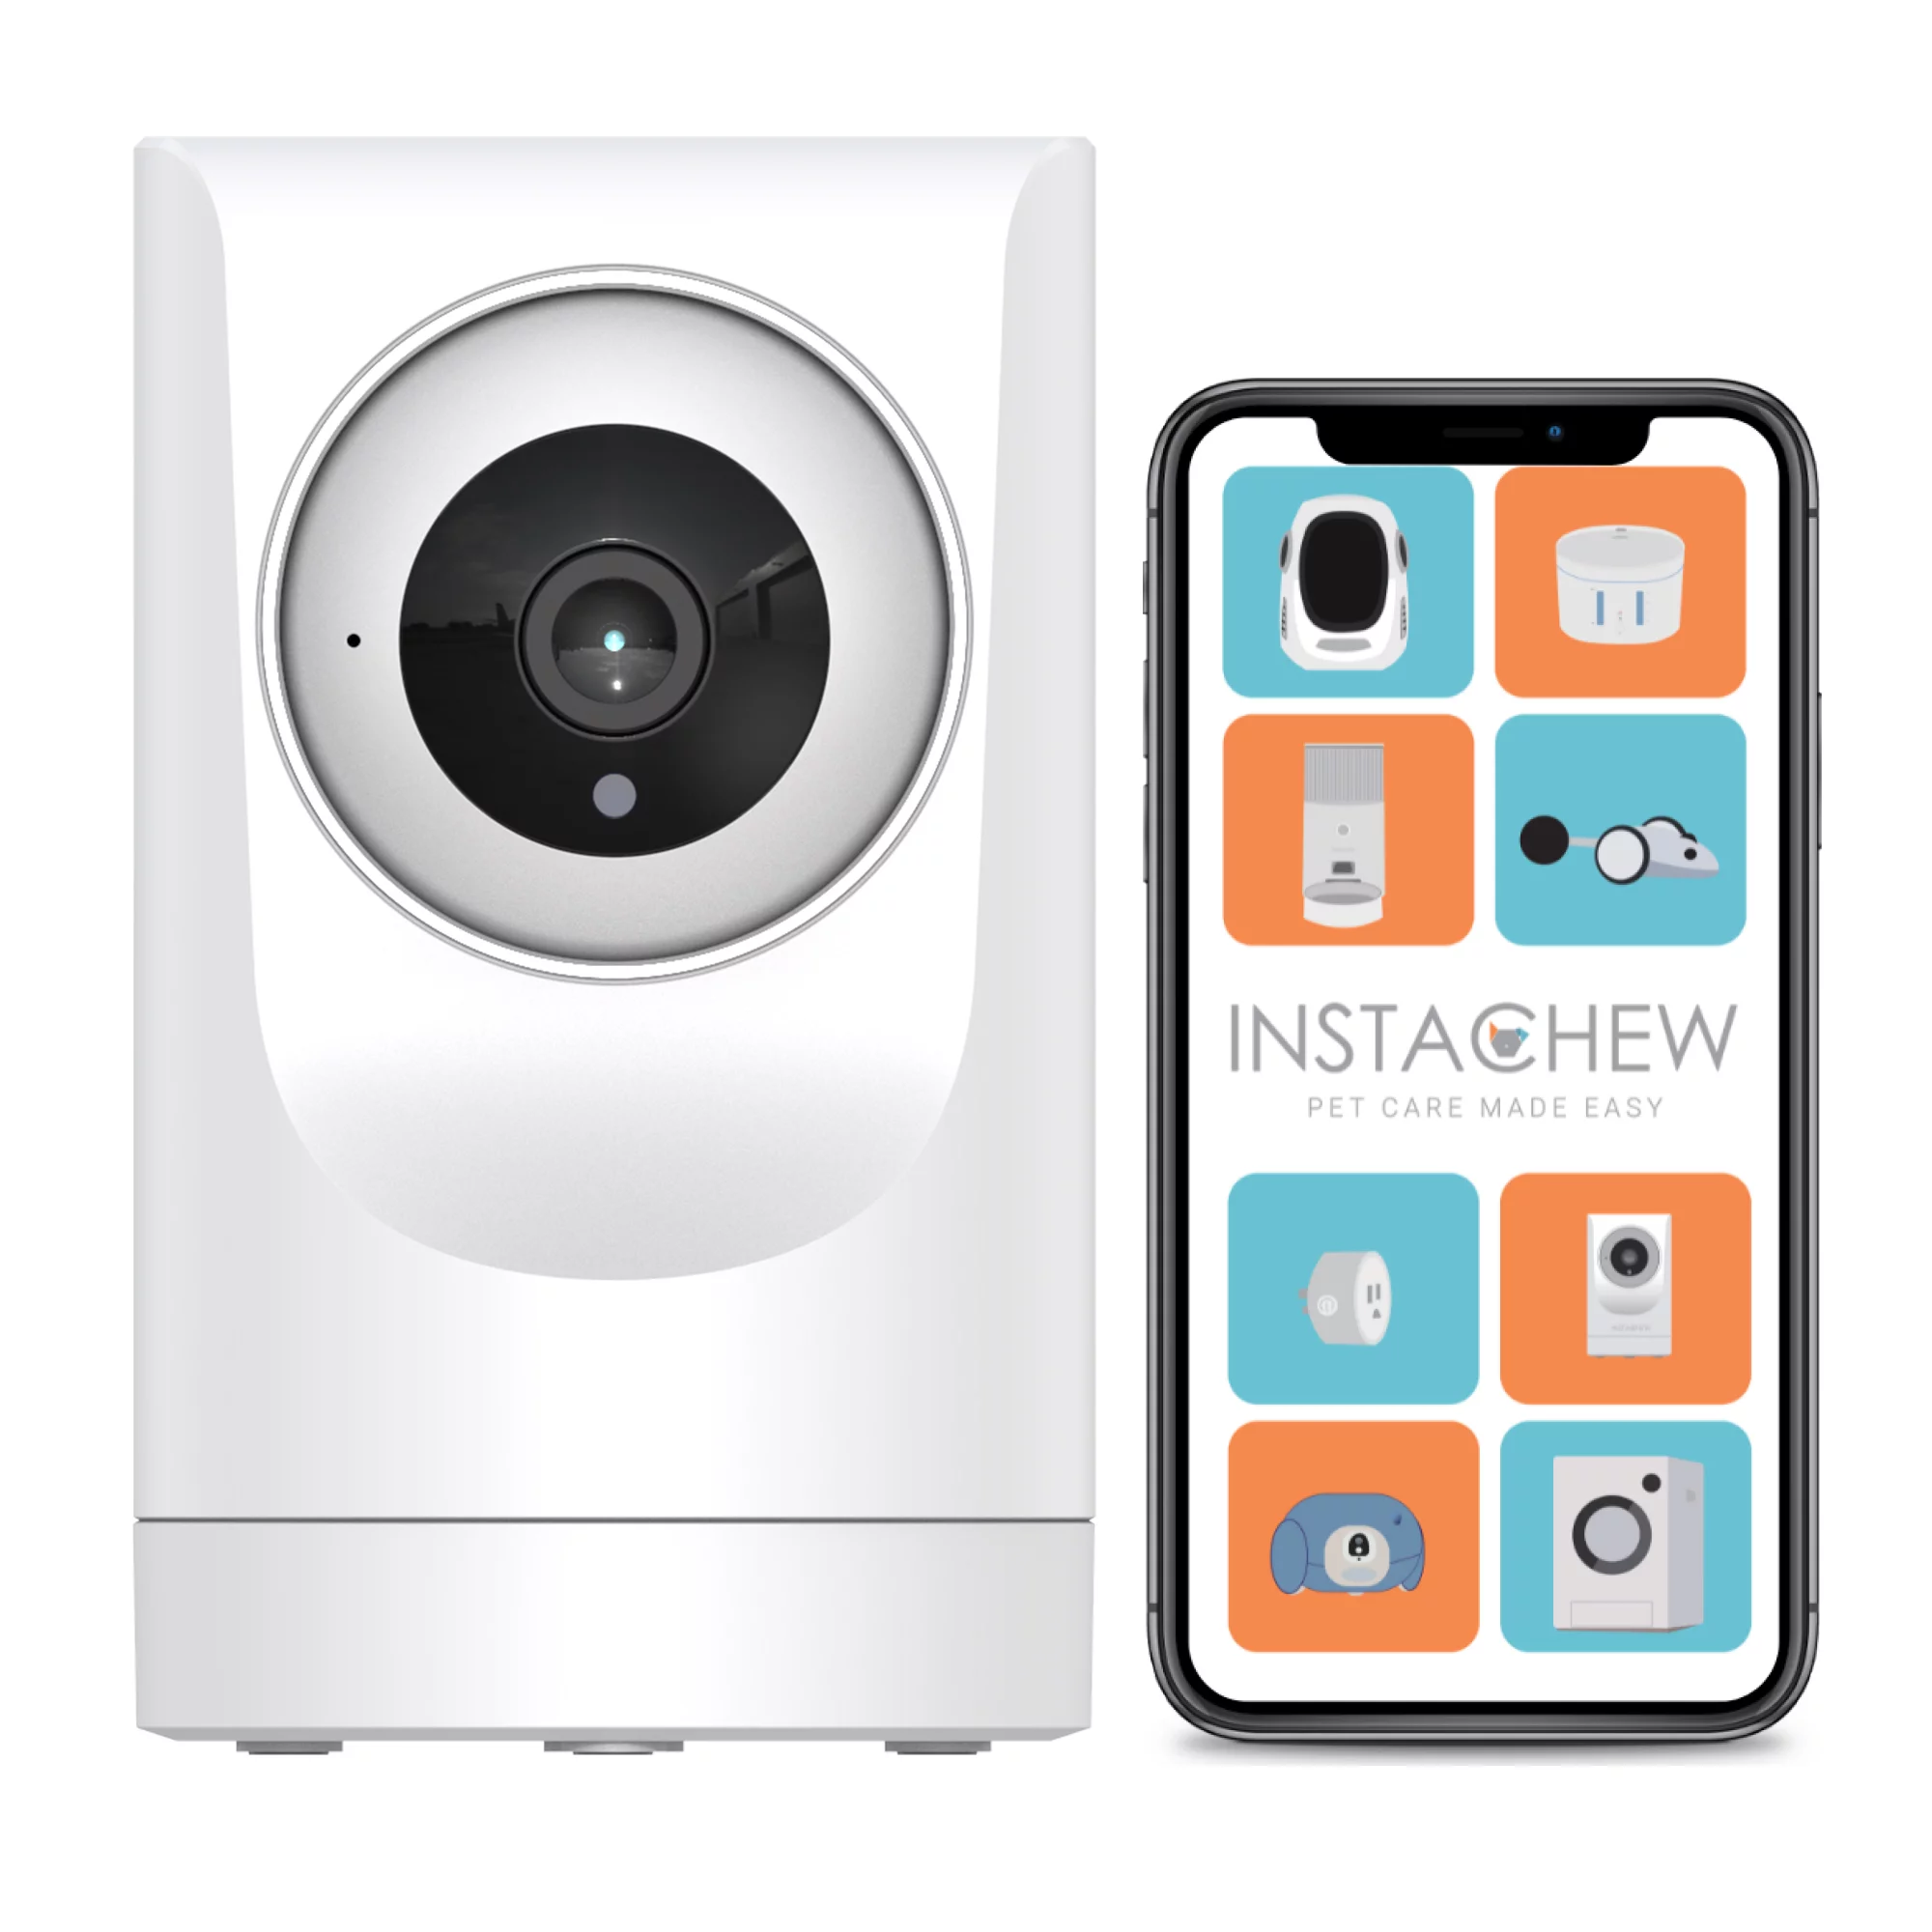 Instachew Puresight 360 Wi-Fi Pet Camera, App-Enabled, Indoor Security for Cats and Dogs